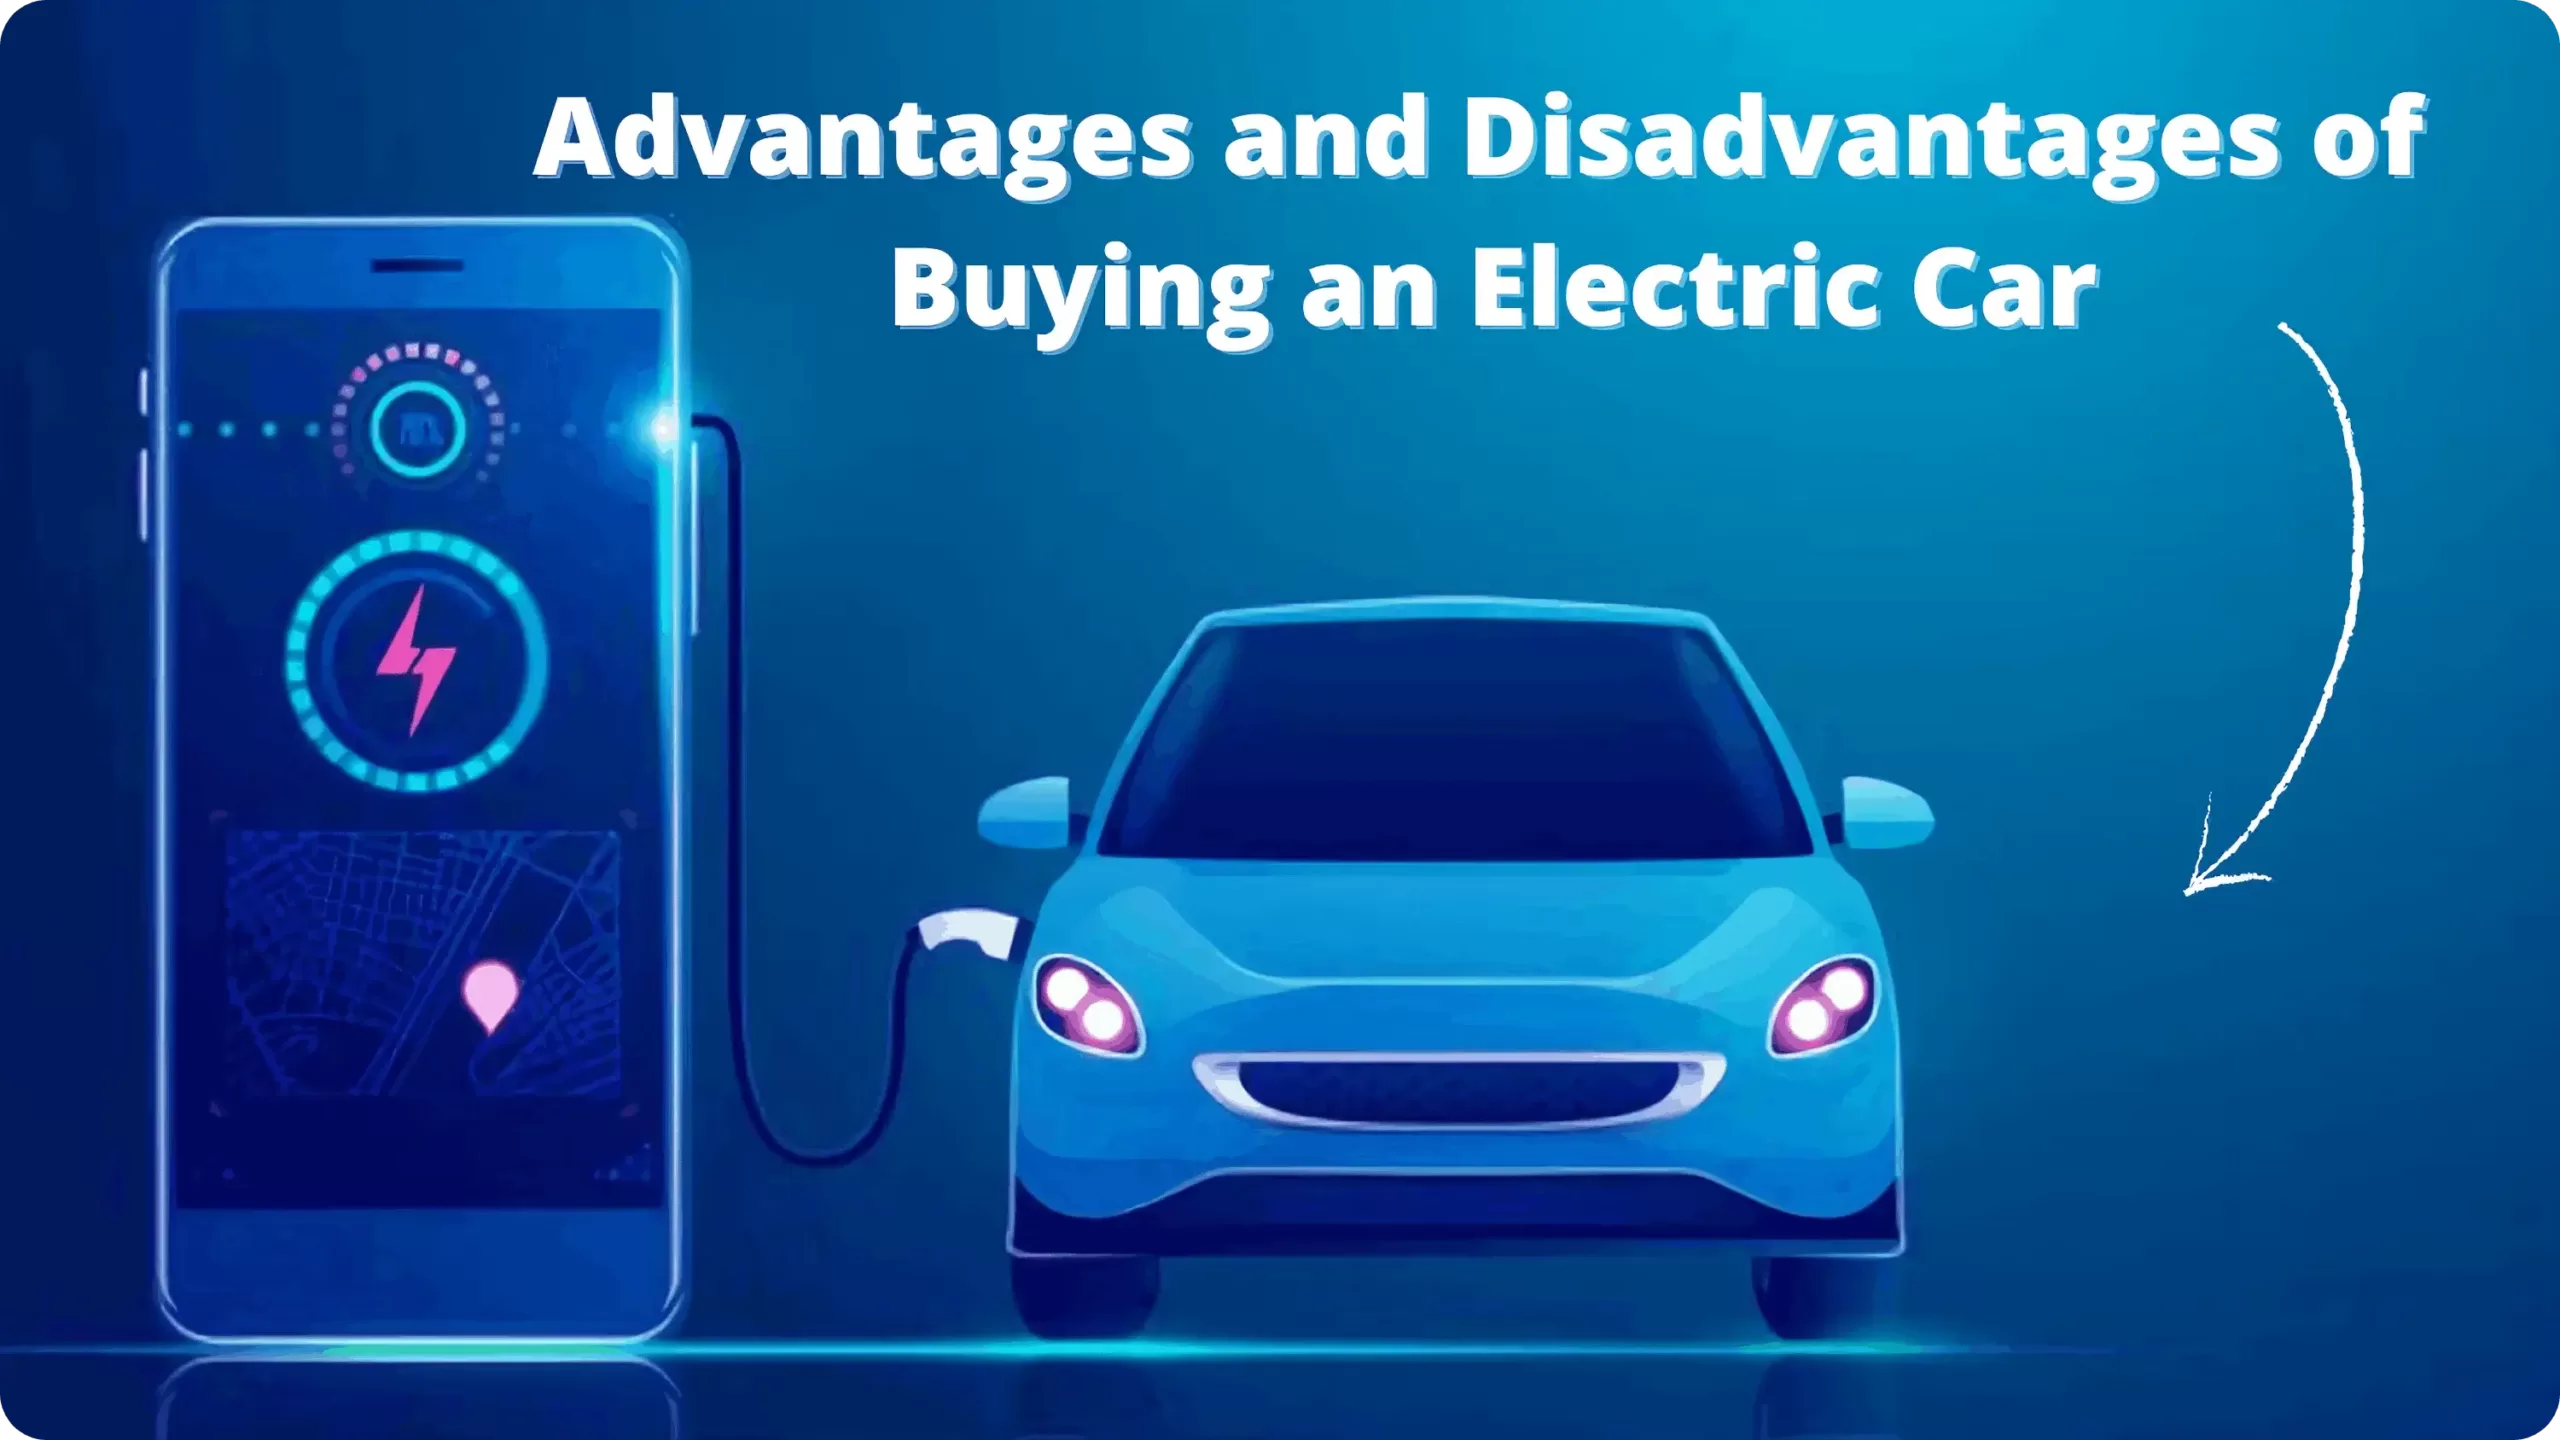 https://e-vehicleinfo.com/advantages-and-disadvantages-of-buying-an-electric-car/